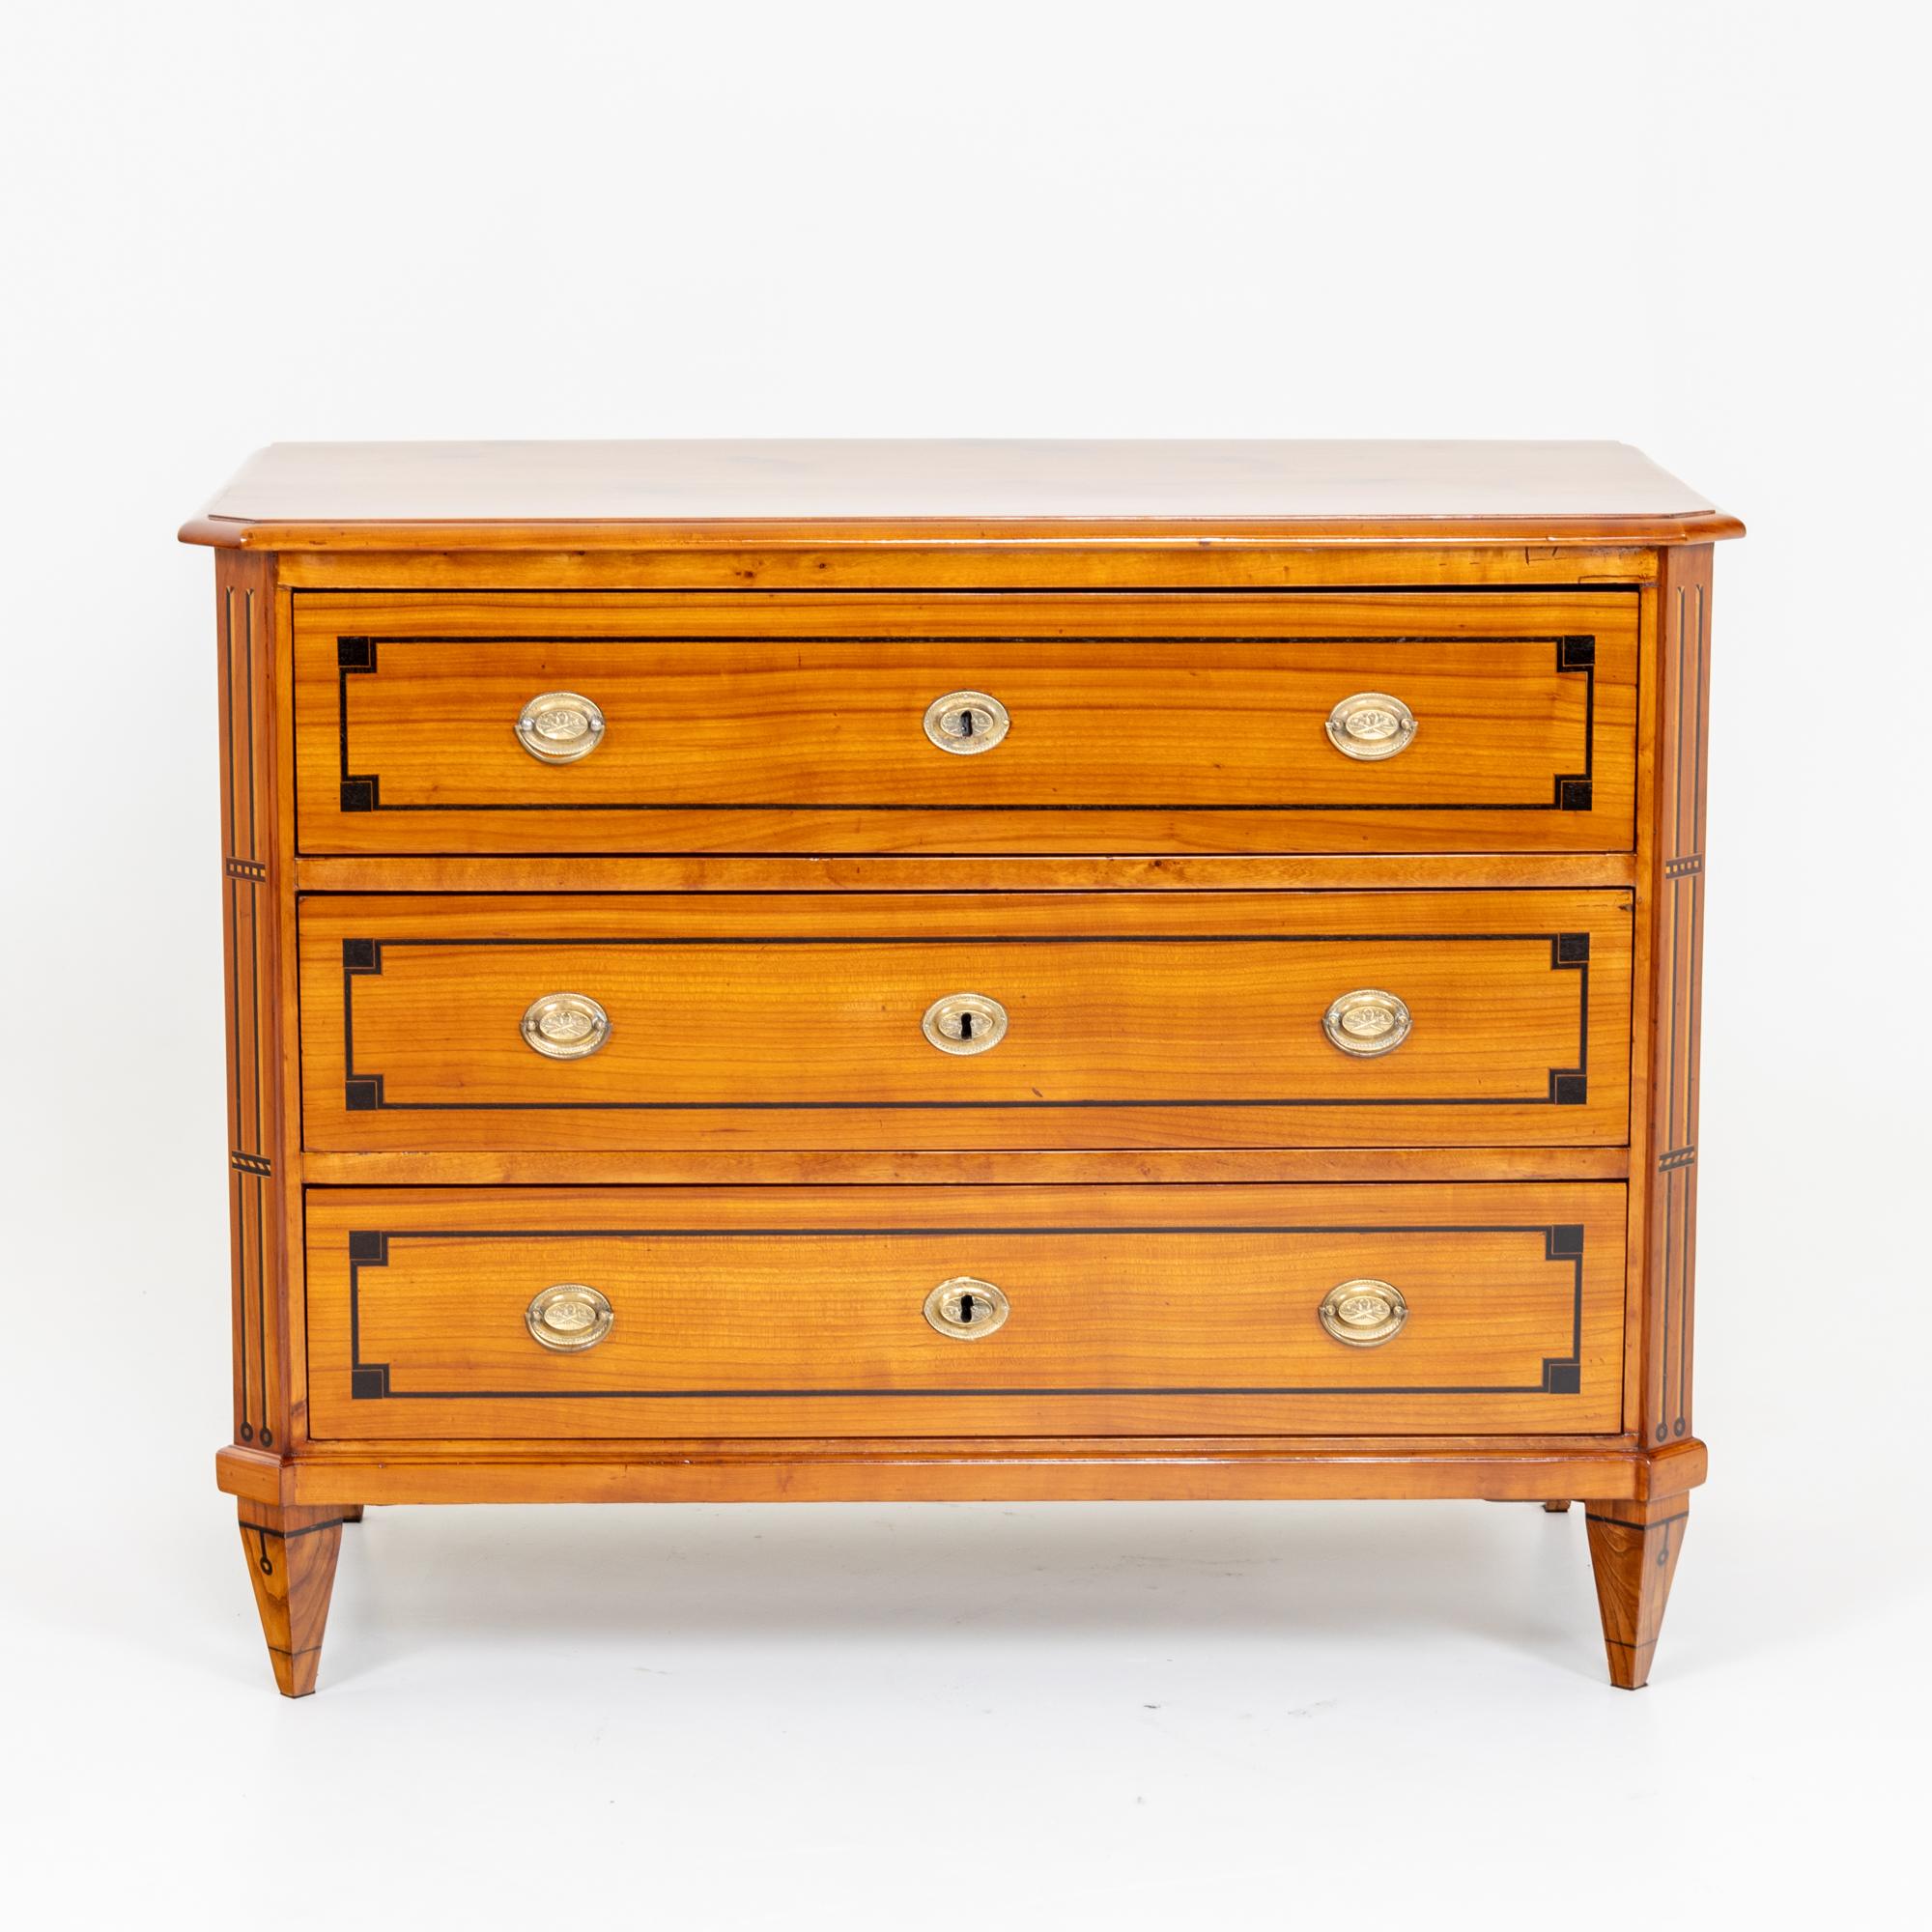 Neoclassical chest of drawers on square pointed feet with three drawers and oval bronze fittings. The corpus is decorated with thread inlays on the bevelled corners and the fronts of the drawers. The cherry veneered chest of drawers has been